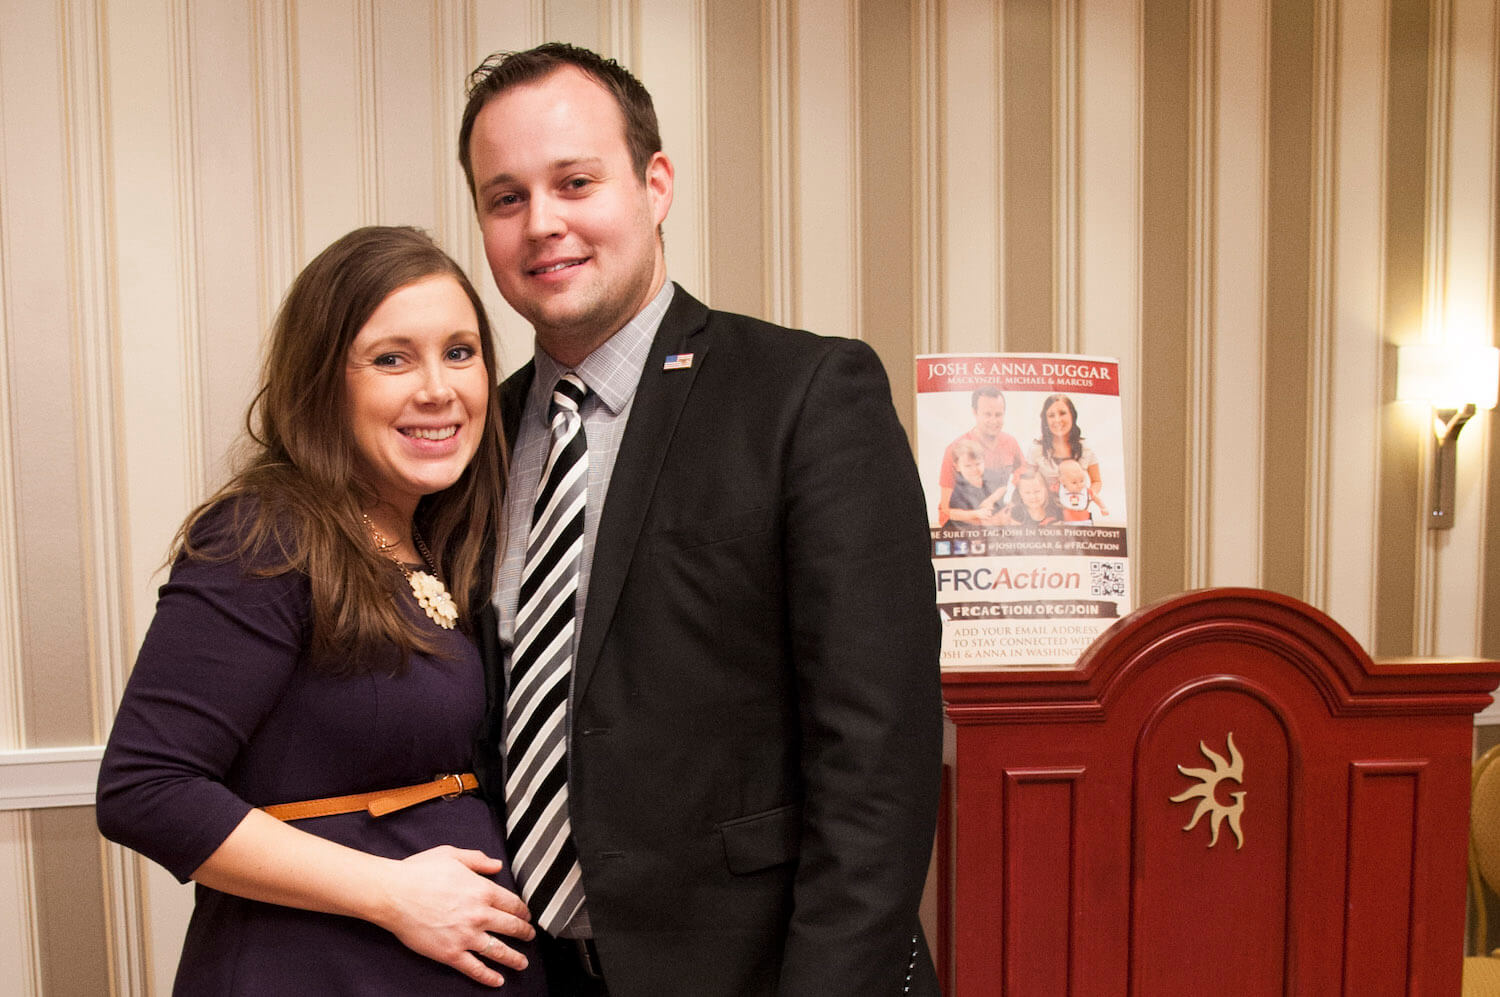 Josh and Anna Duggar smiling with their arms around each other